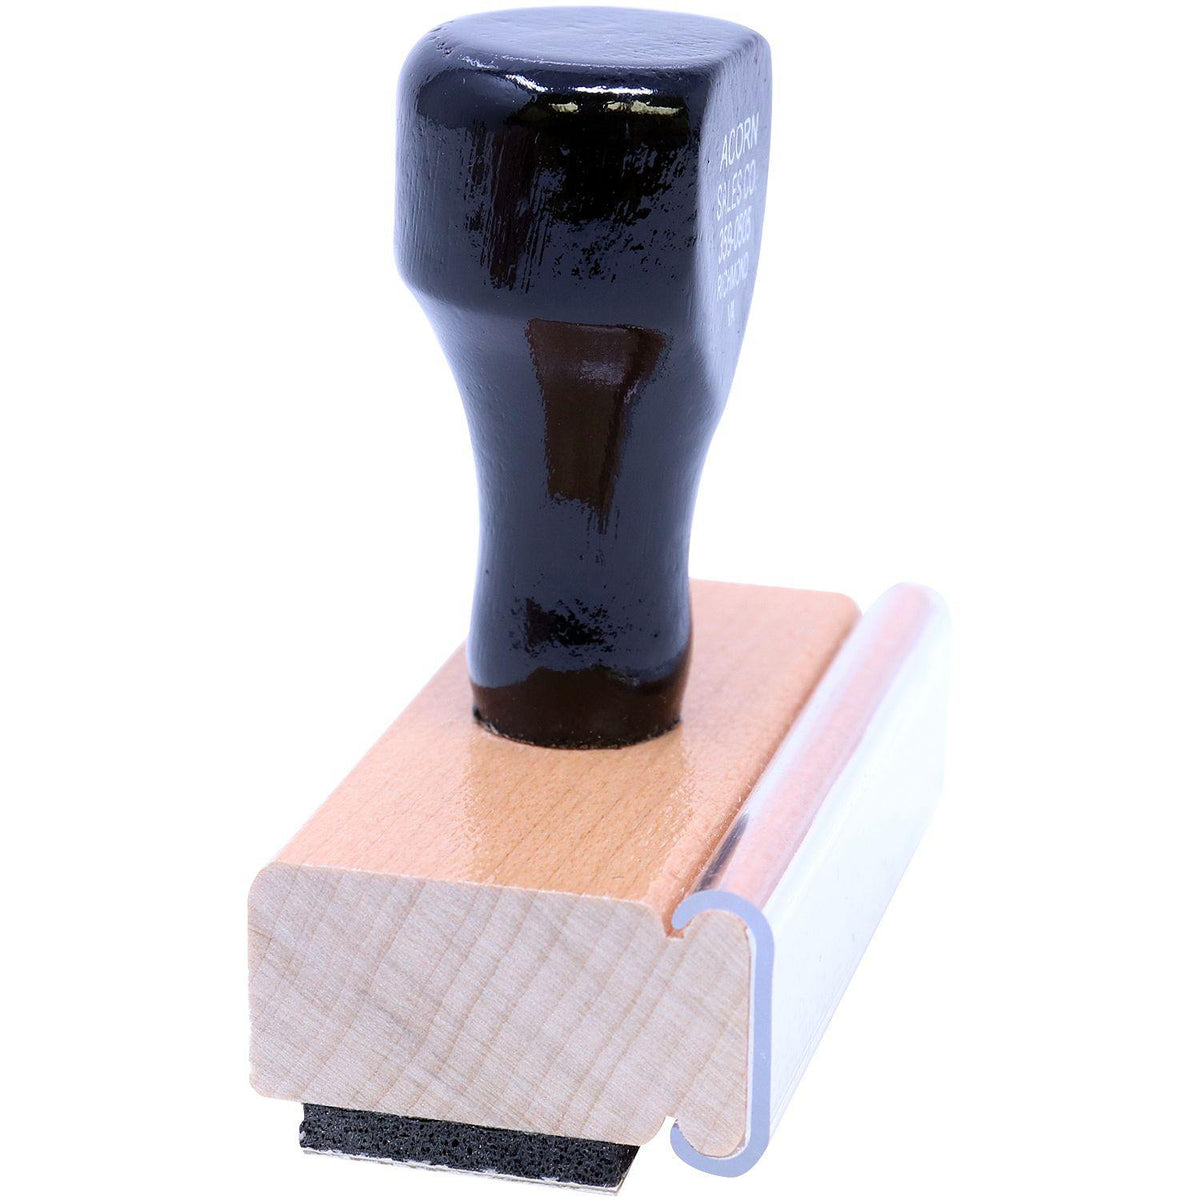 Mid Year Report Rubber Stamp - Engineer Seal Stamps - Brand_Acorn, Impression Size_Small, Stamp Type_Regular Stamp, Type of Use_Business, Type of Use_Finance